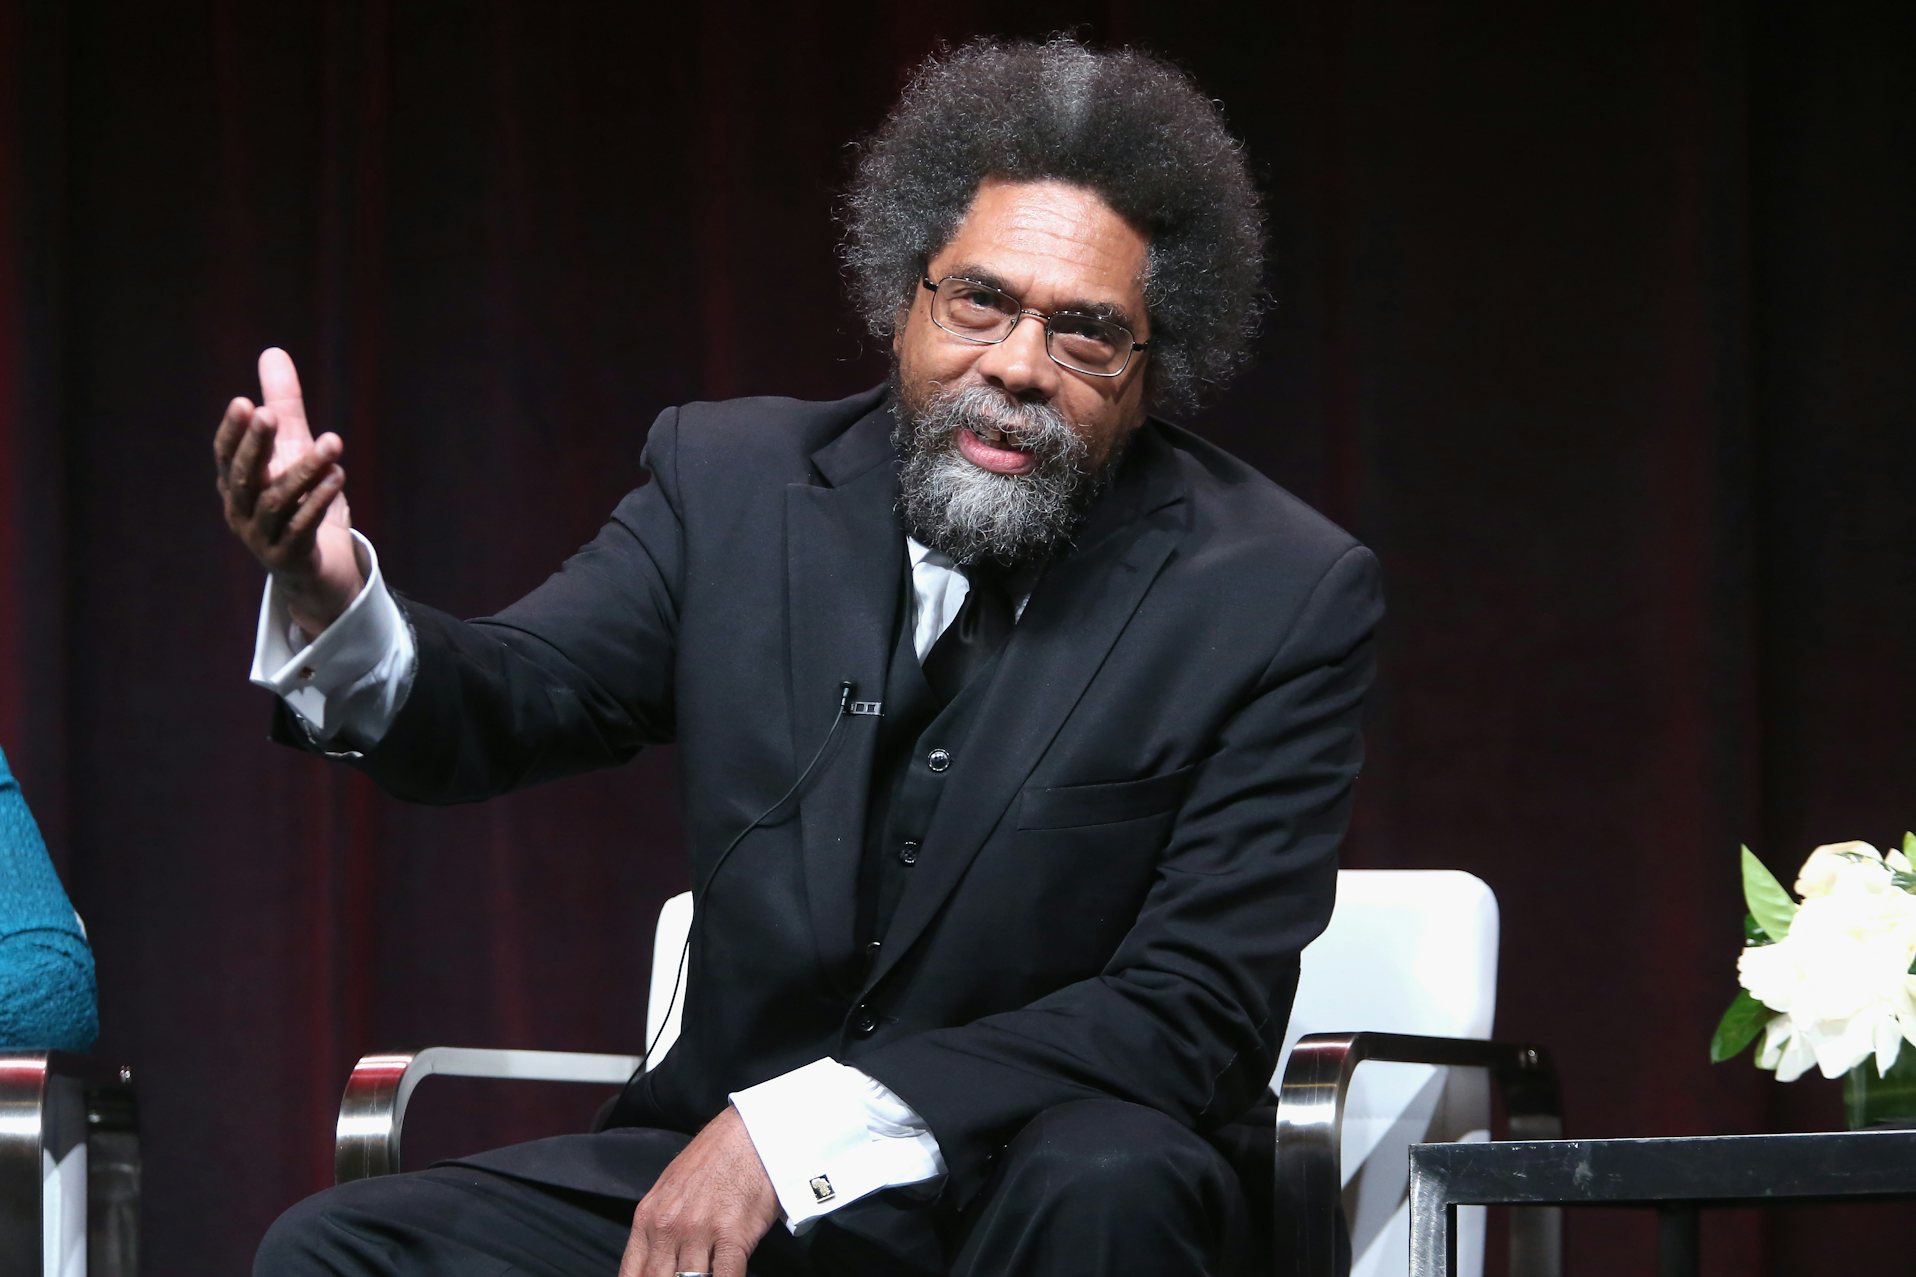 Green Party Candidate Cornel West Owes the IRS More than $500,000 in Taxes (newrepublic.com)